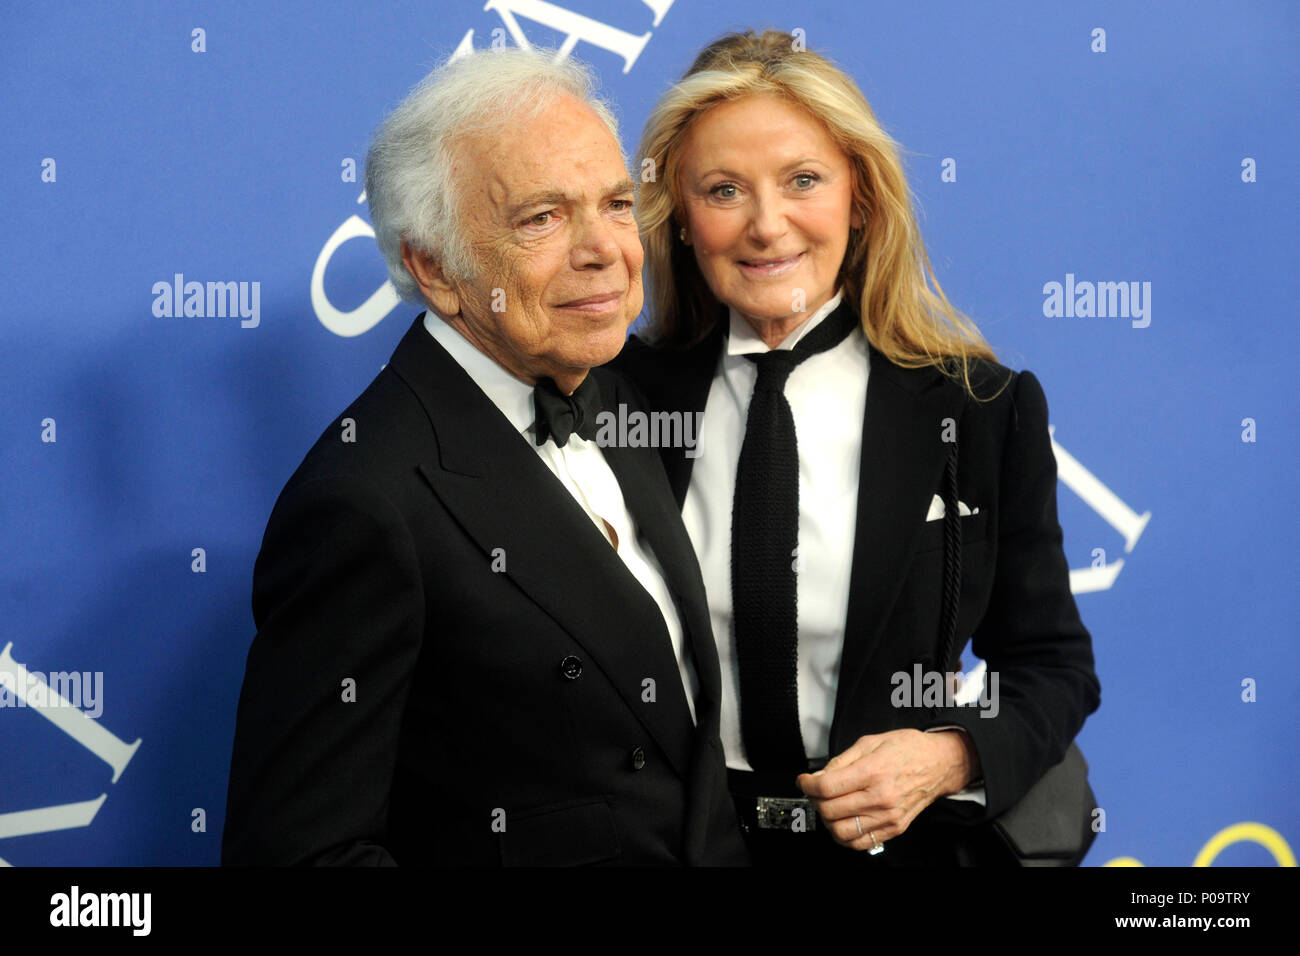 Ralph Lauren and his wife Ricky Lauren attending the CFDA Fashion Awards  2018 at the Brooklyn Museum on June 4, 2018 in New York City Stock Photo -  Alamy